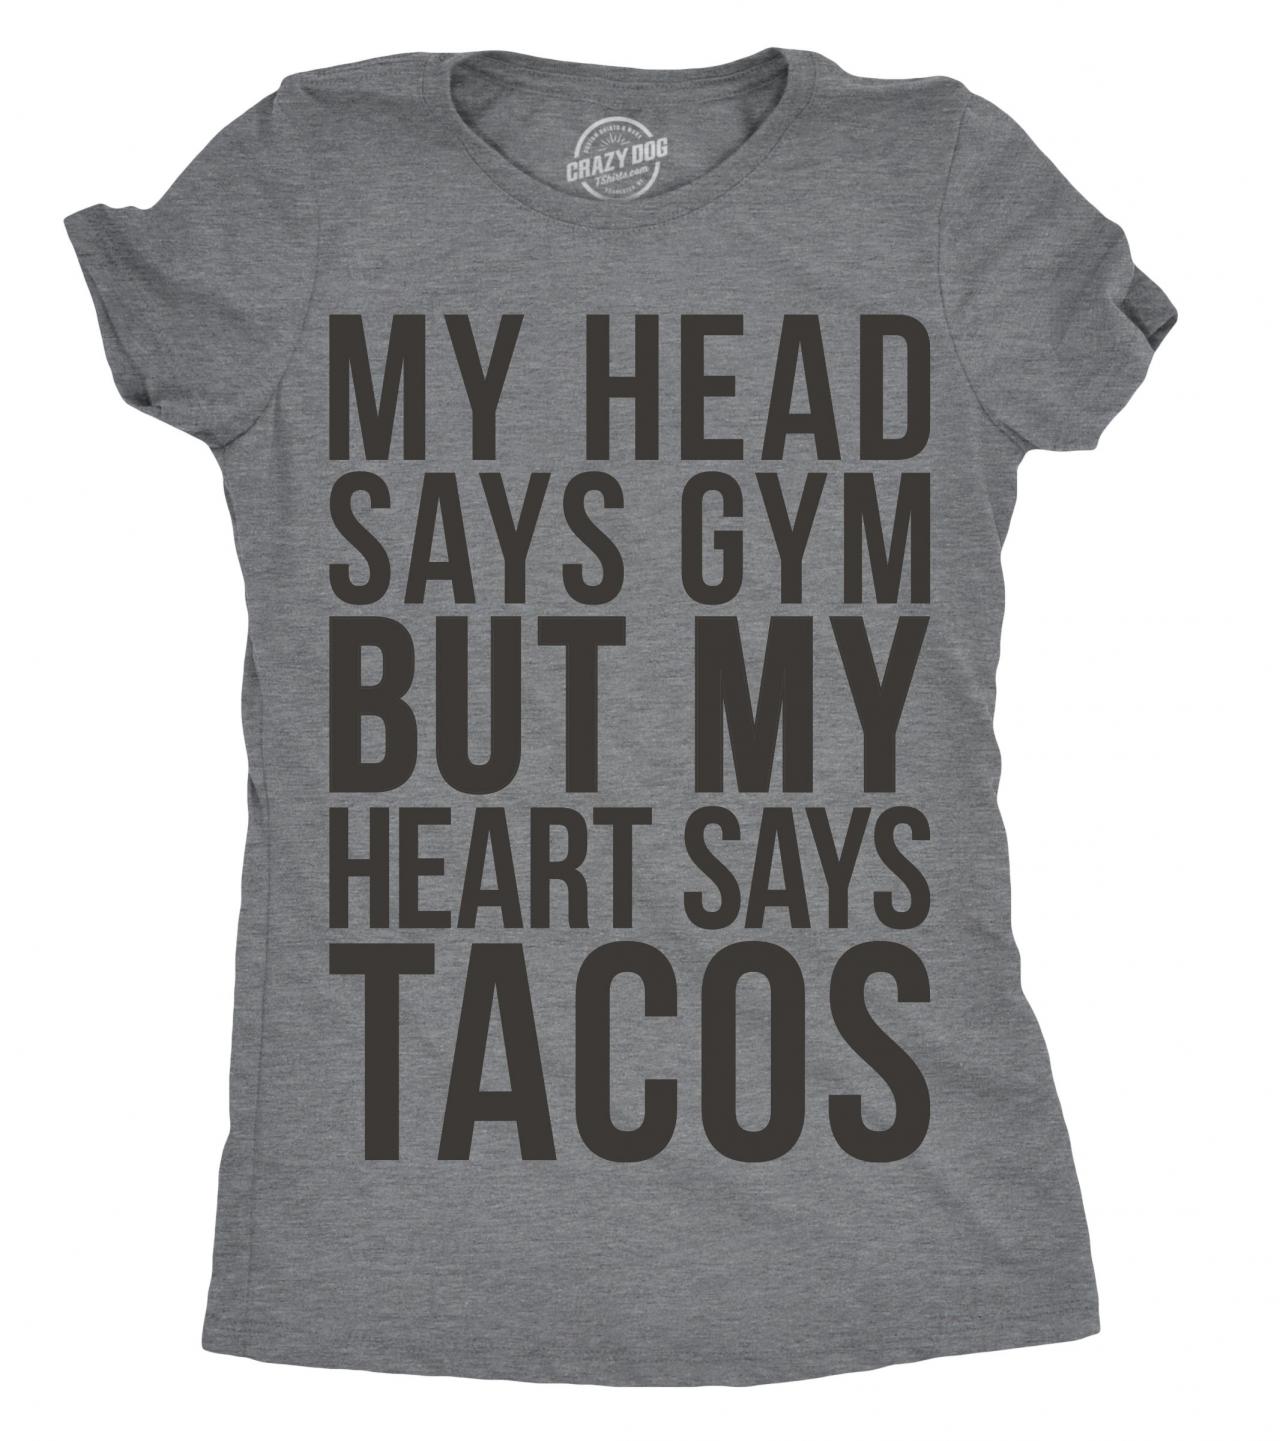 Funny Workout Shirt, Taco T shirt, Womens Cool Tees, Funny Gym Shirt for Women, My Head Says Gym but my Heart Says Tacos, Funny Womens Shirt